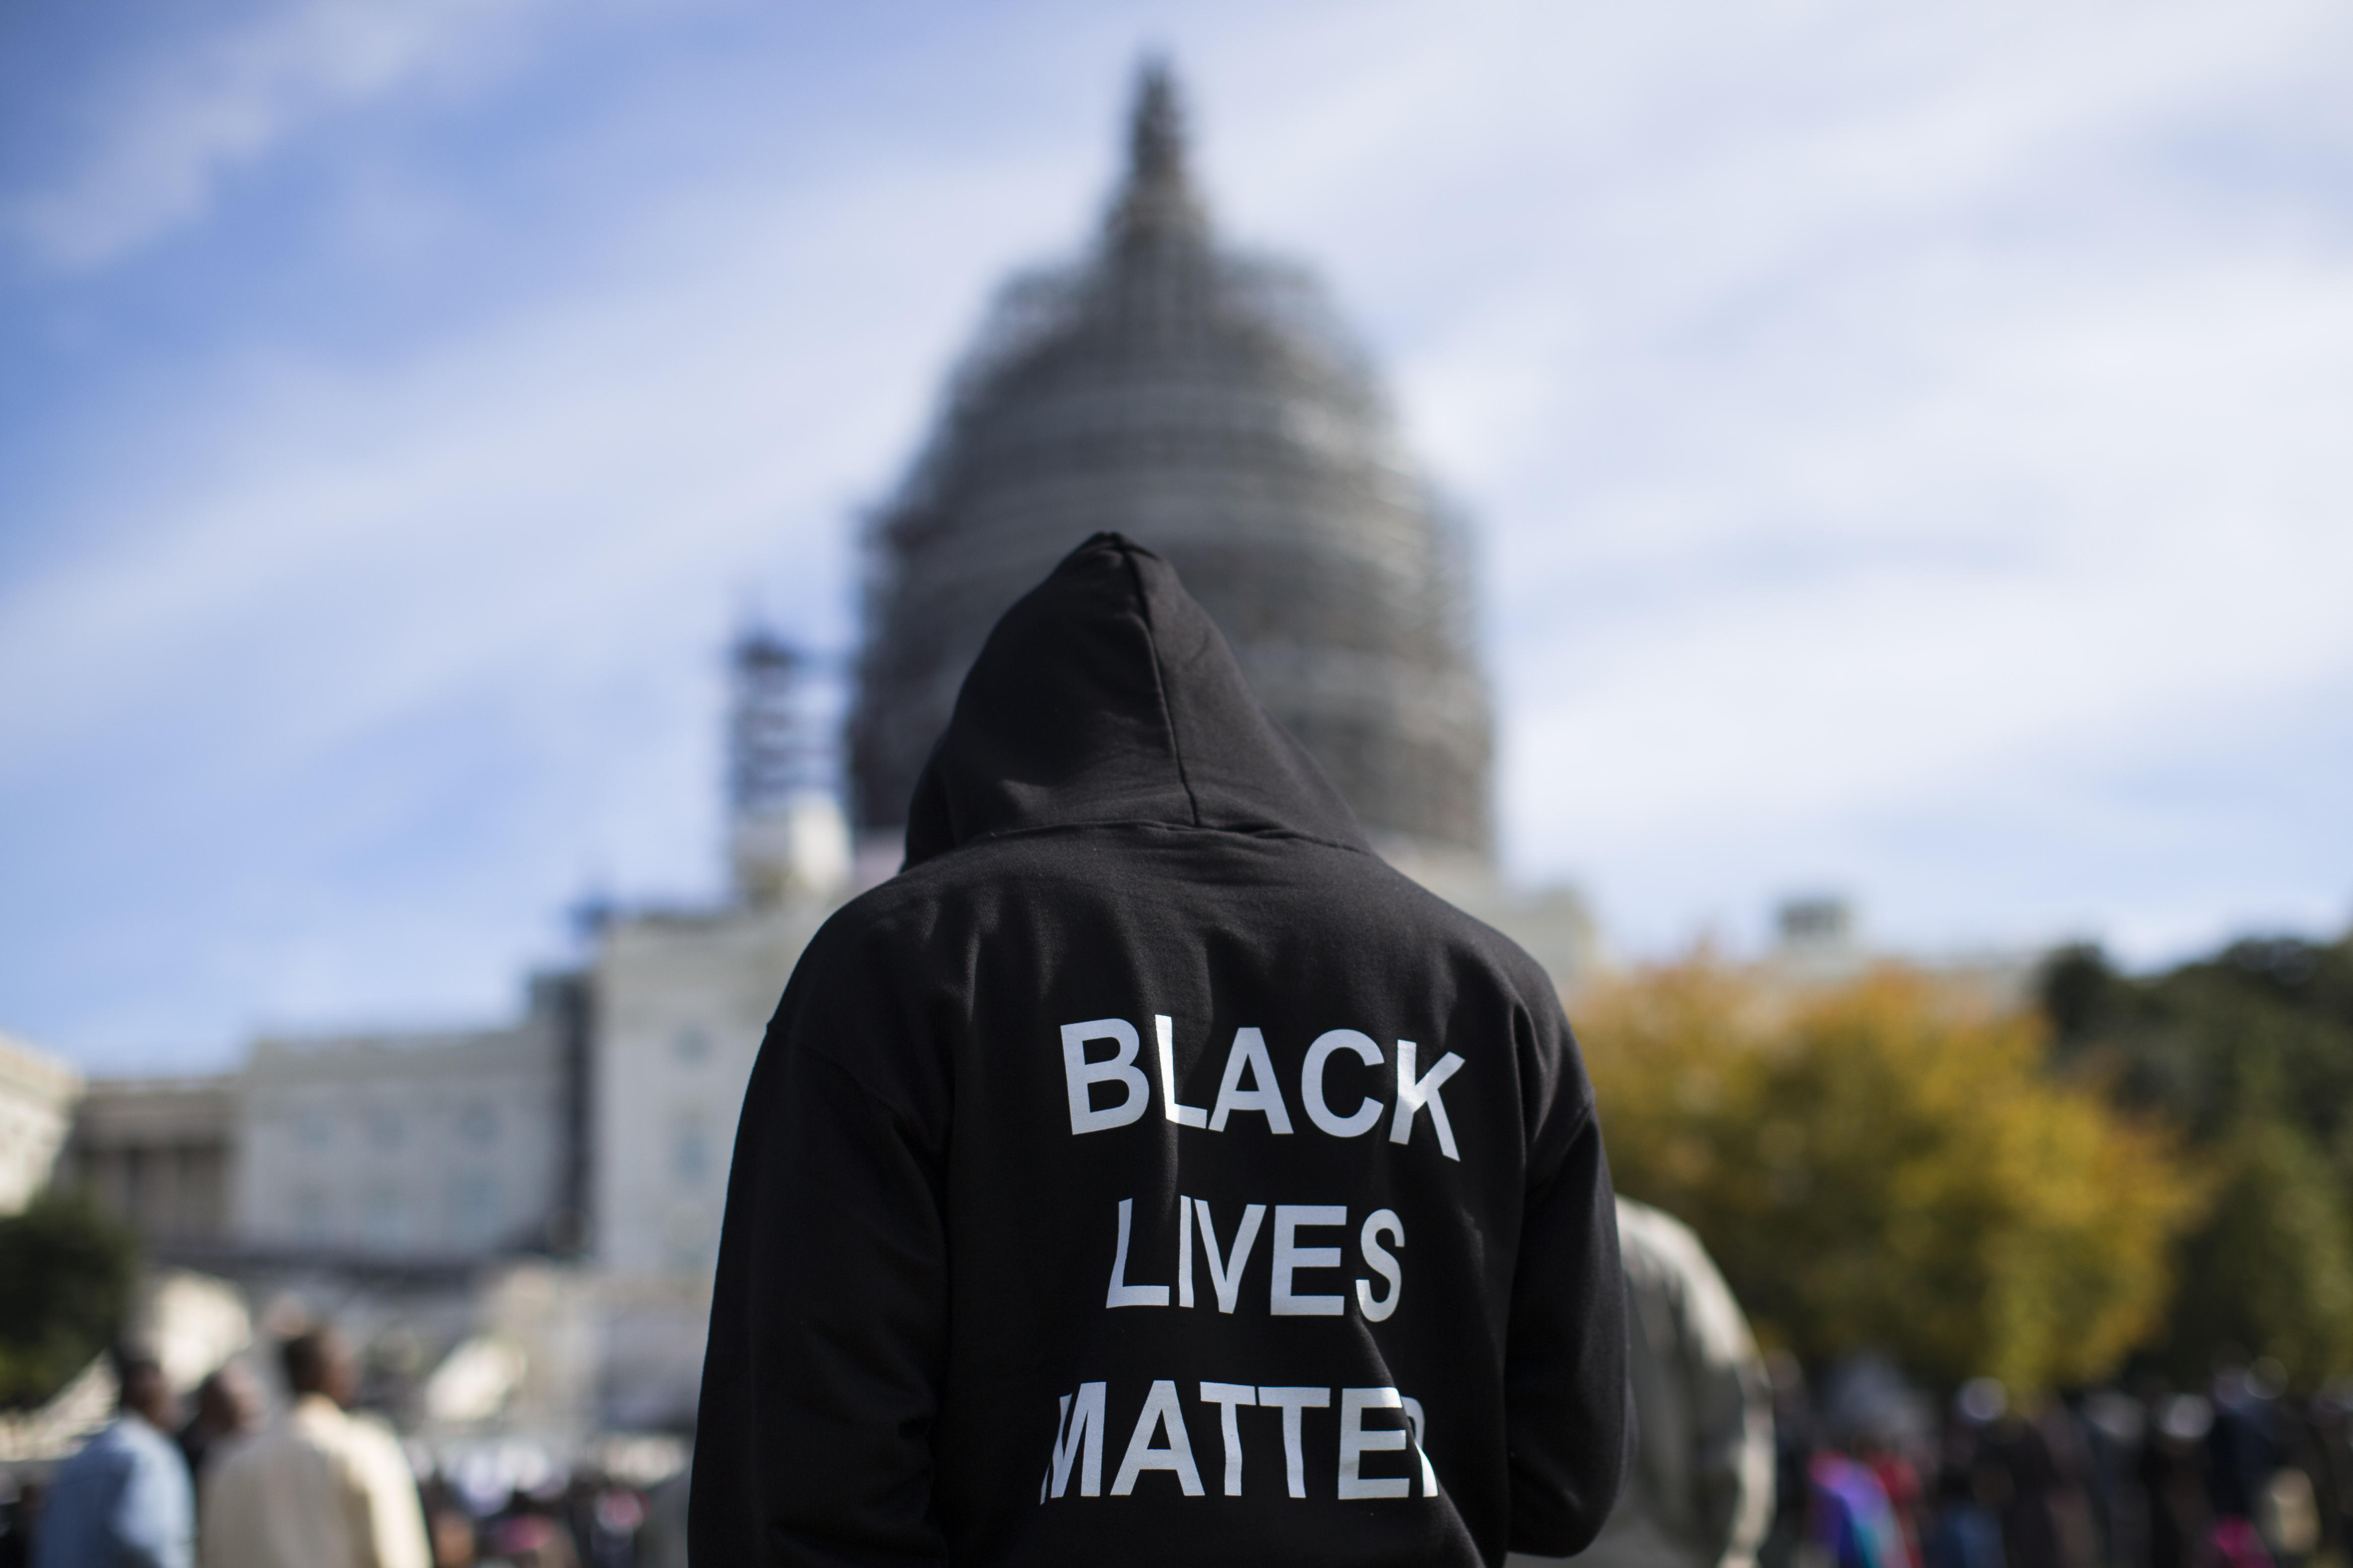 The Black Lives Matter movement has been making strides.